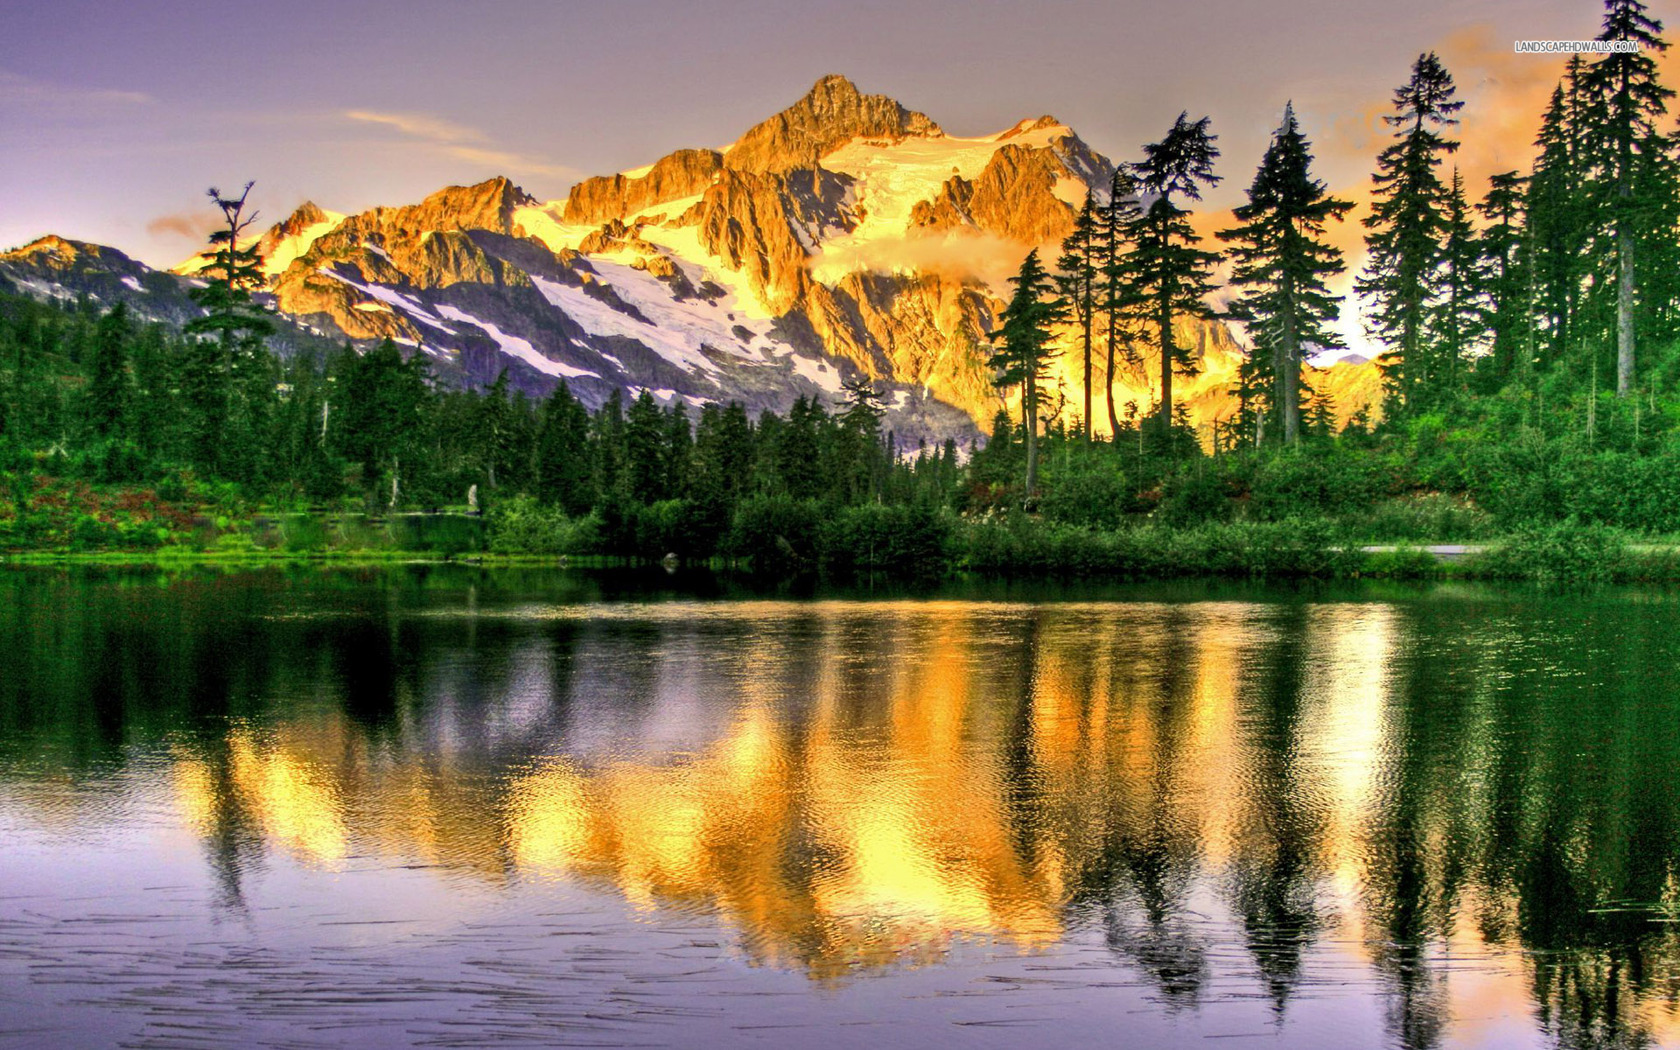 Green And Gold Reflecting In The Lake Jpg